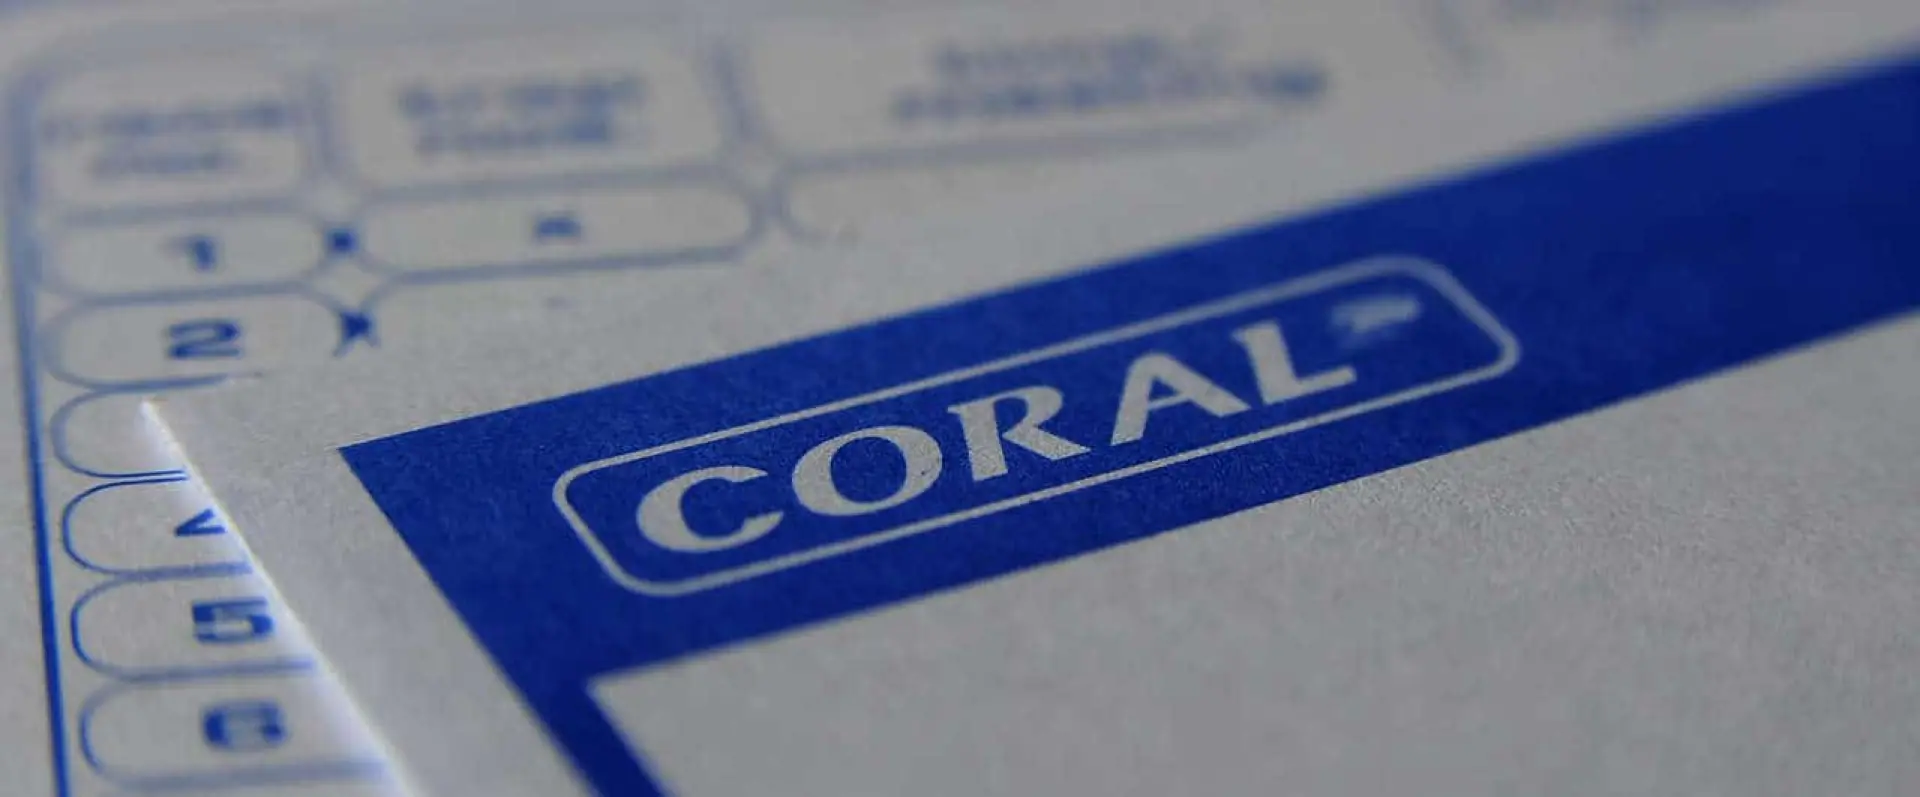 A Coral Football Jackpot win gave a betting return of £100k to two Hertfordshire punters.